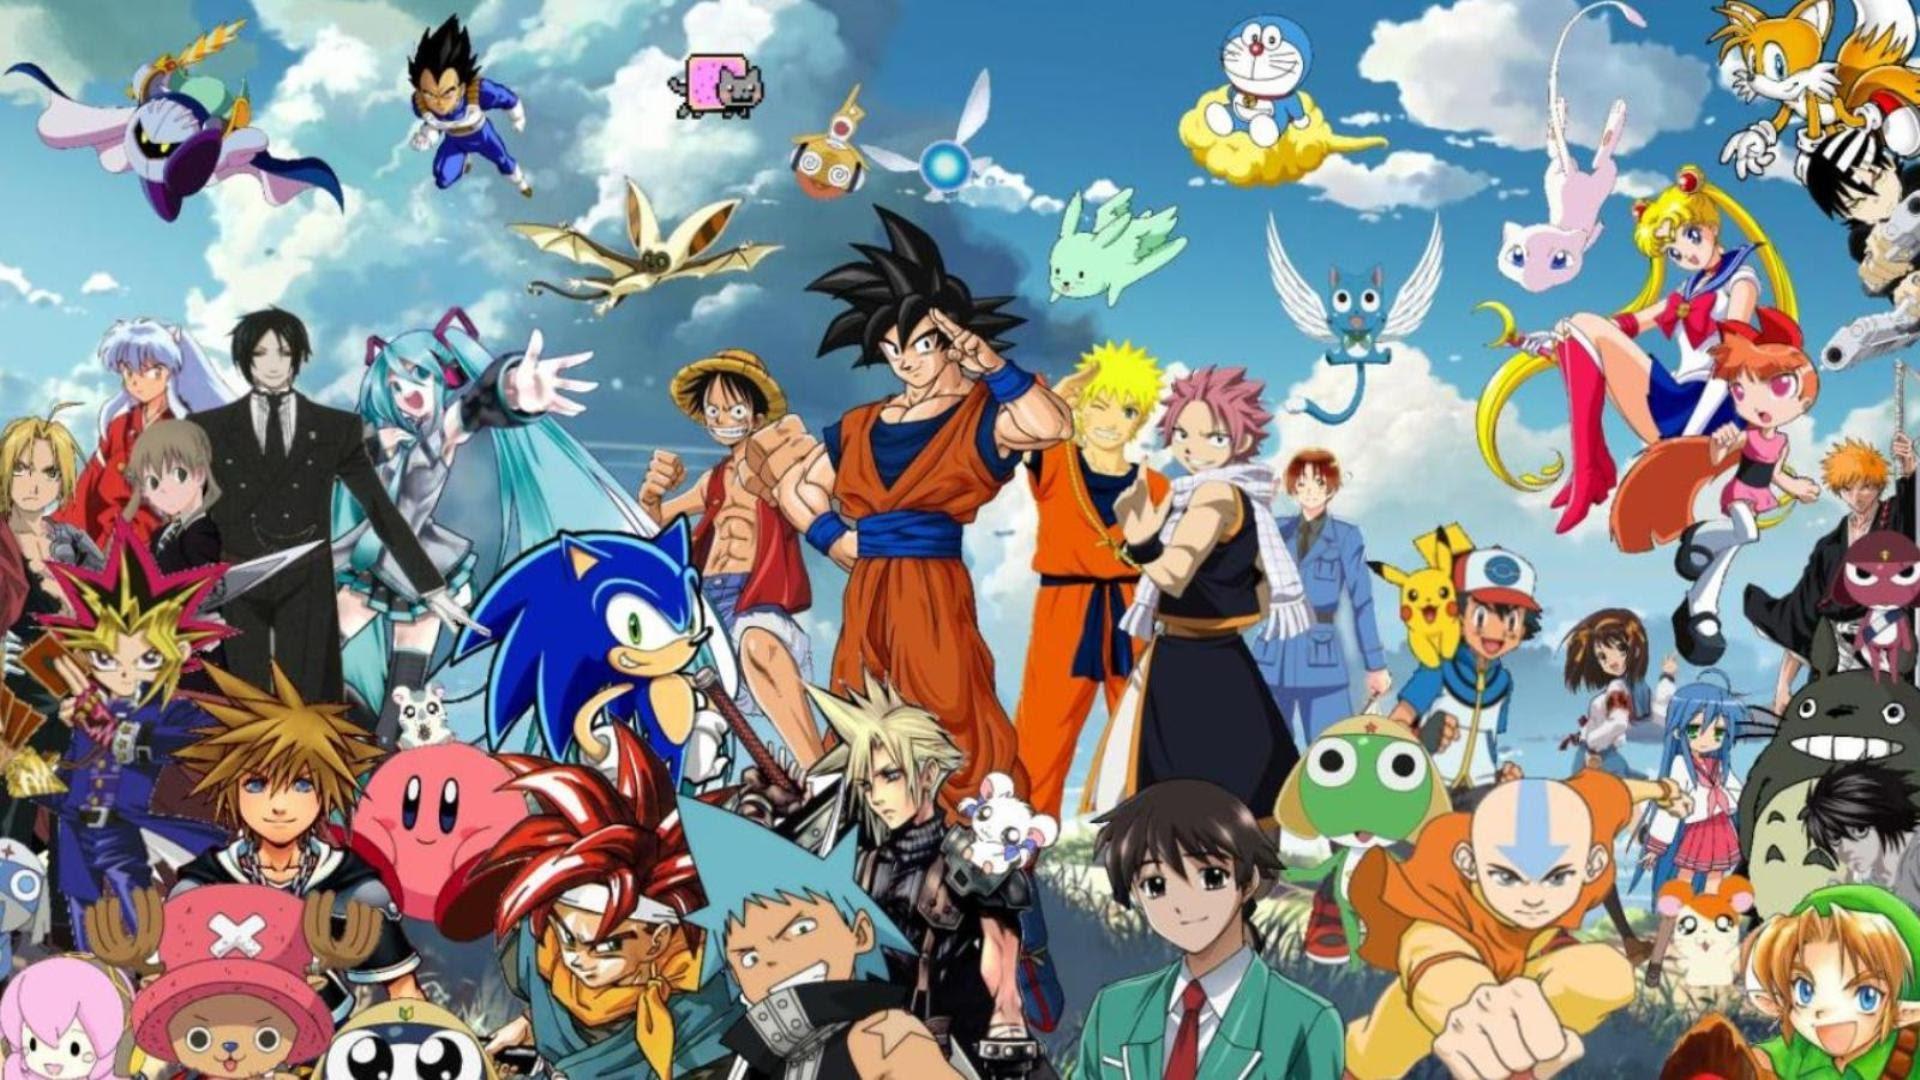 100+] Anime All Characters Hd Wallpapers